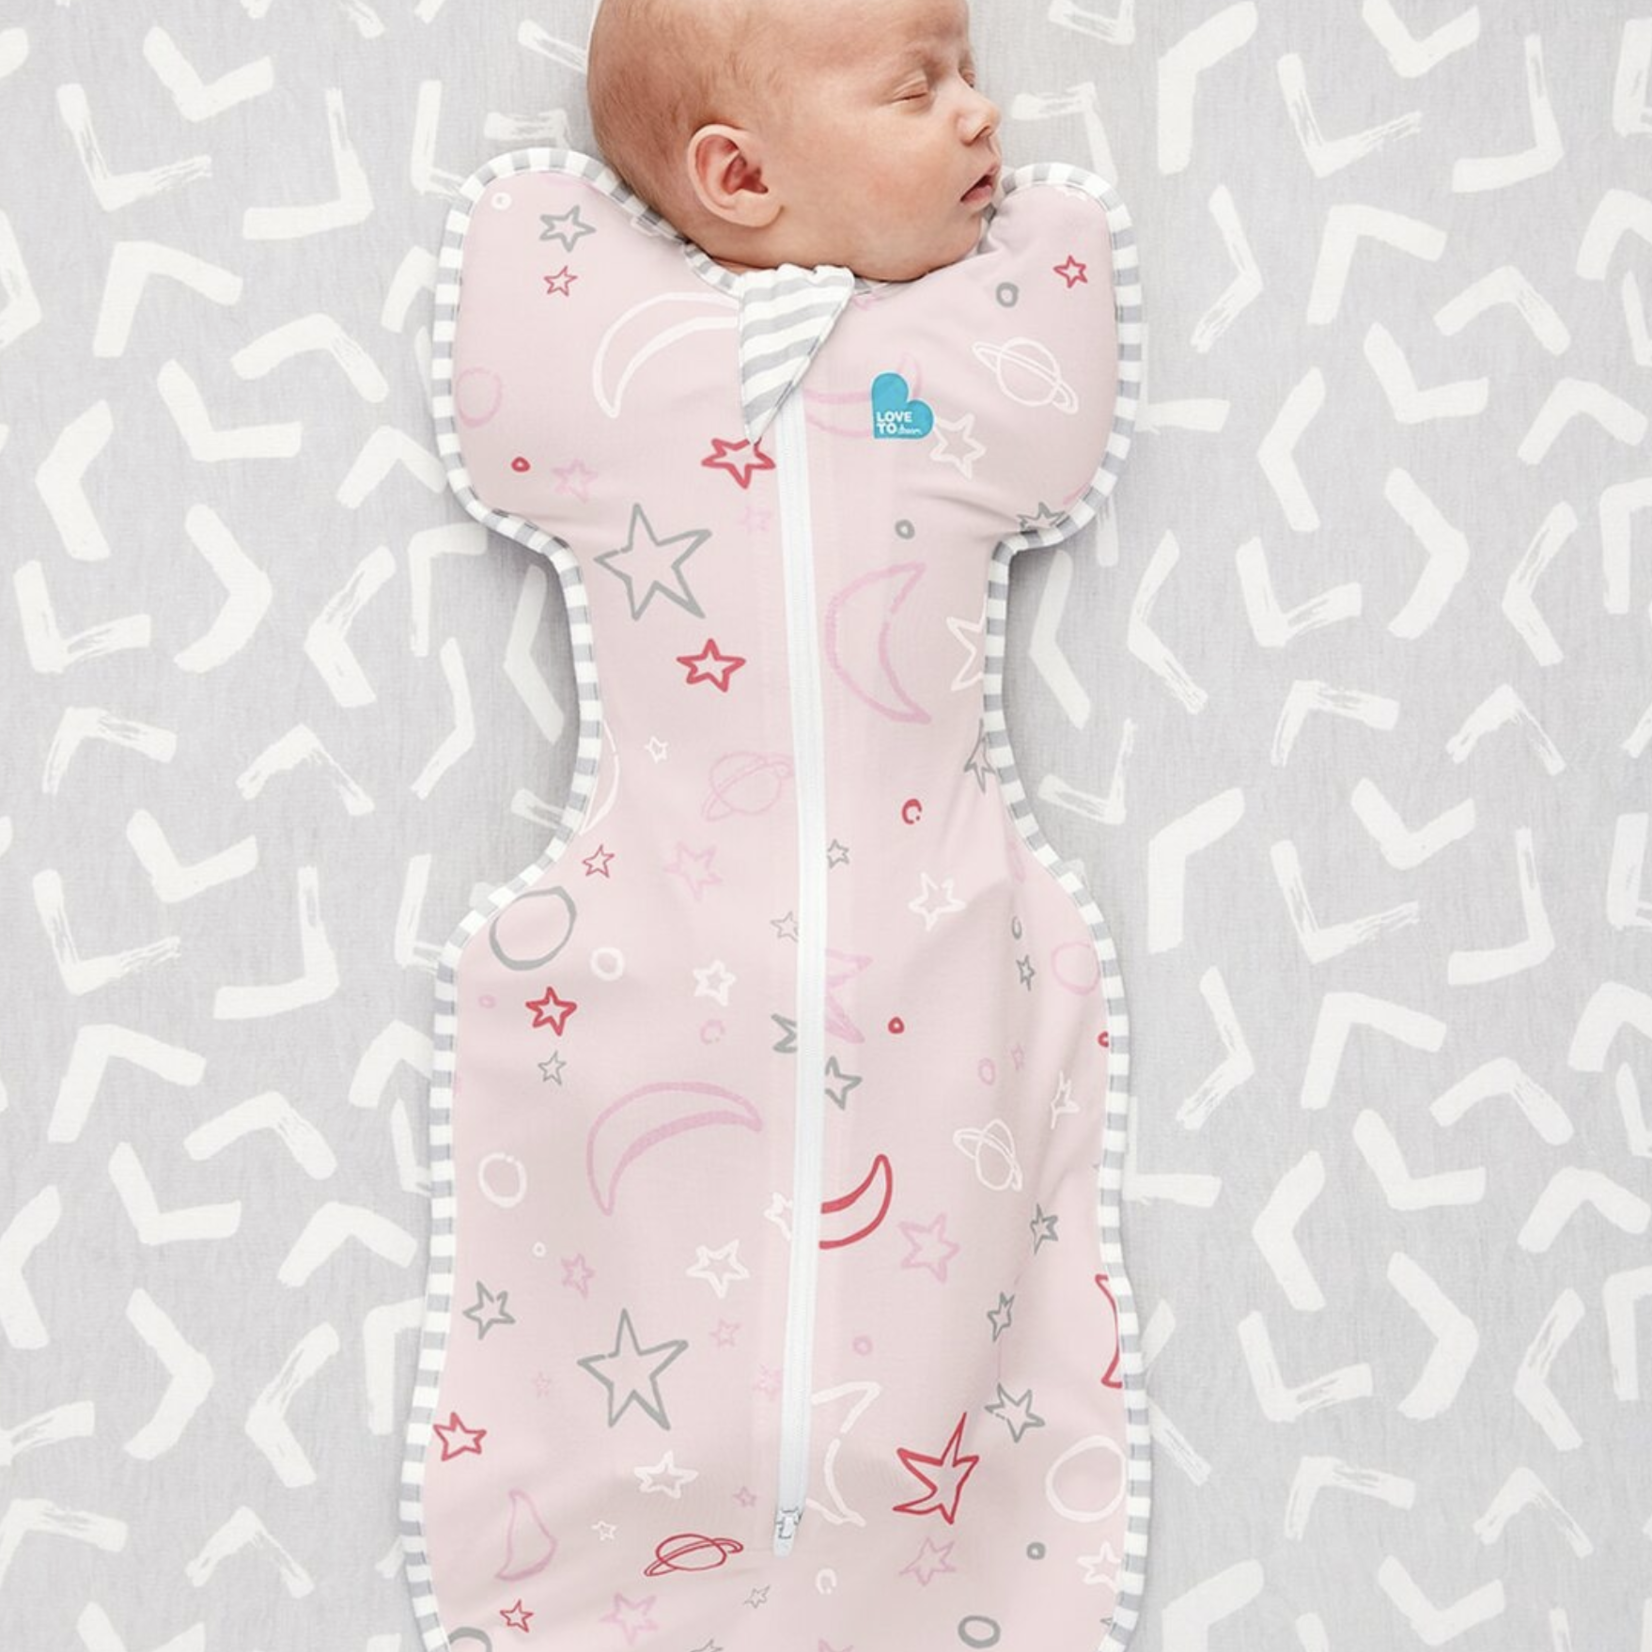 Love To Dream SWADDLE UP Bamboo 1.0T Pink-Moon & Stars